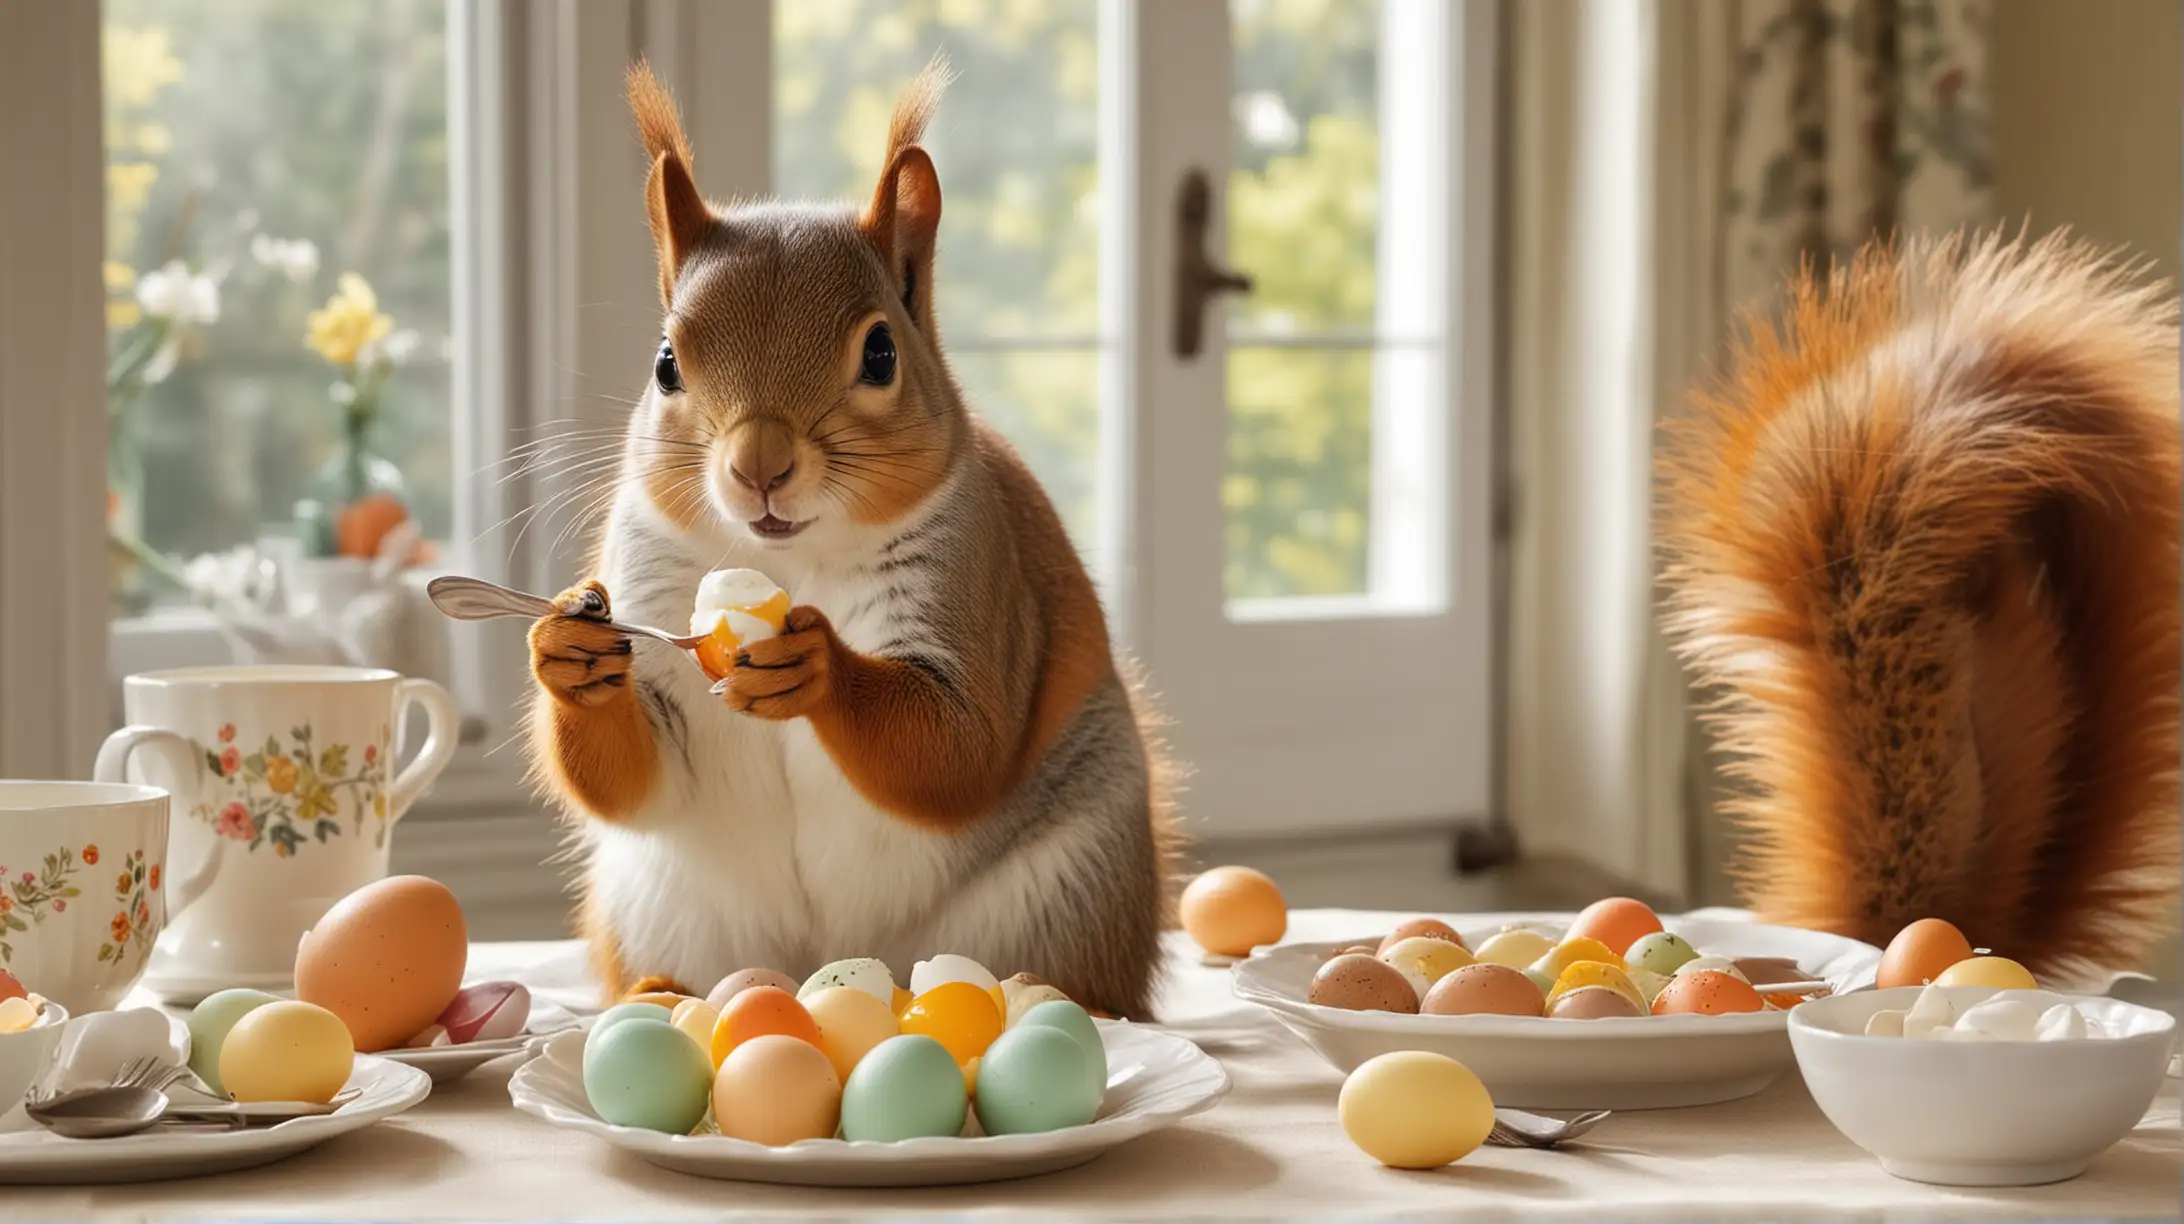 Colorful Easter Squirrel Dining on Decorated Table